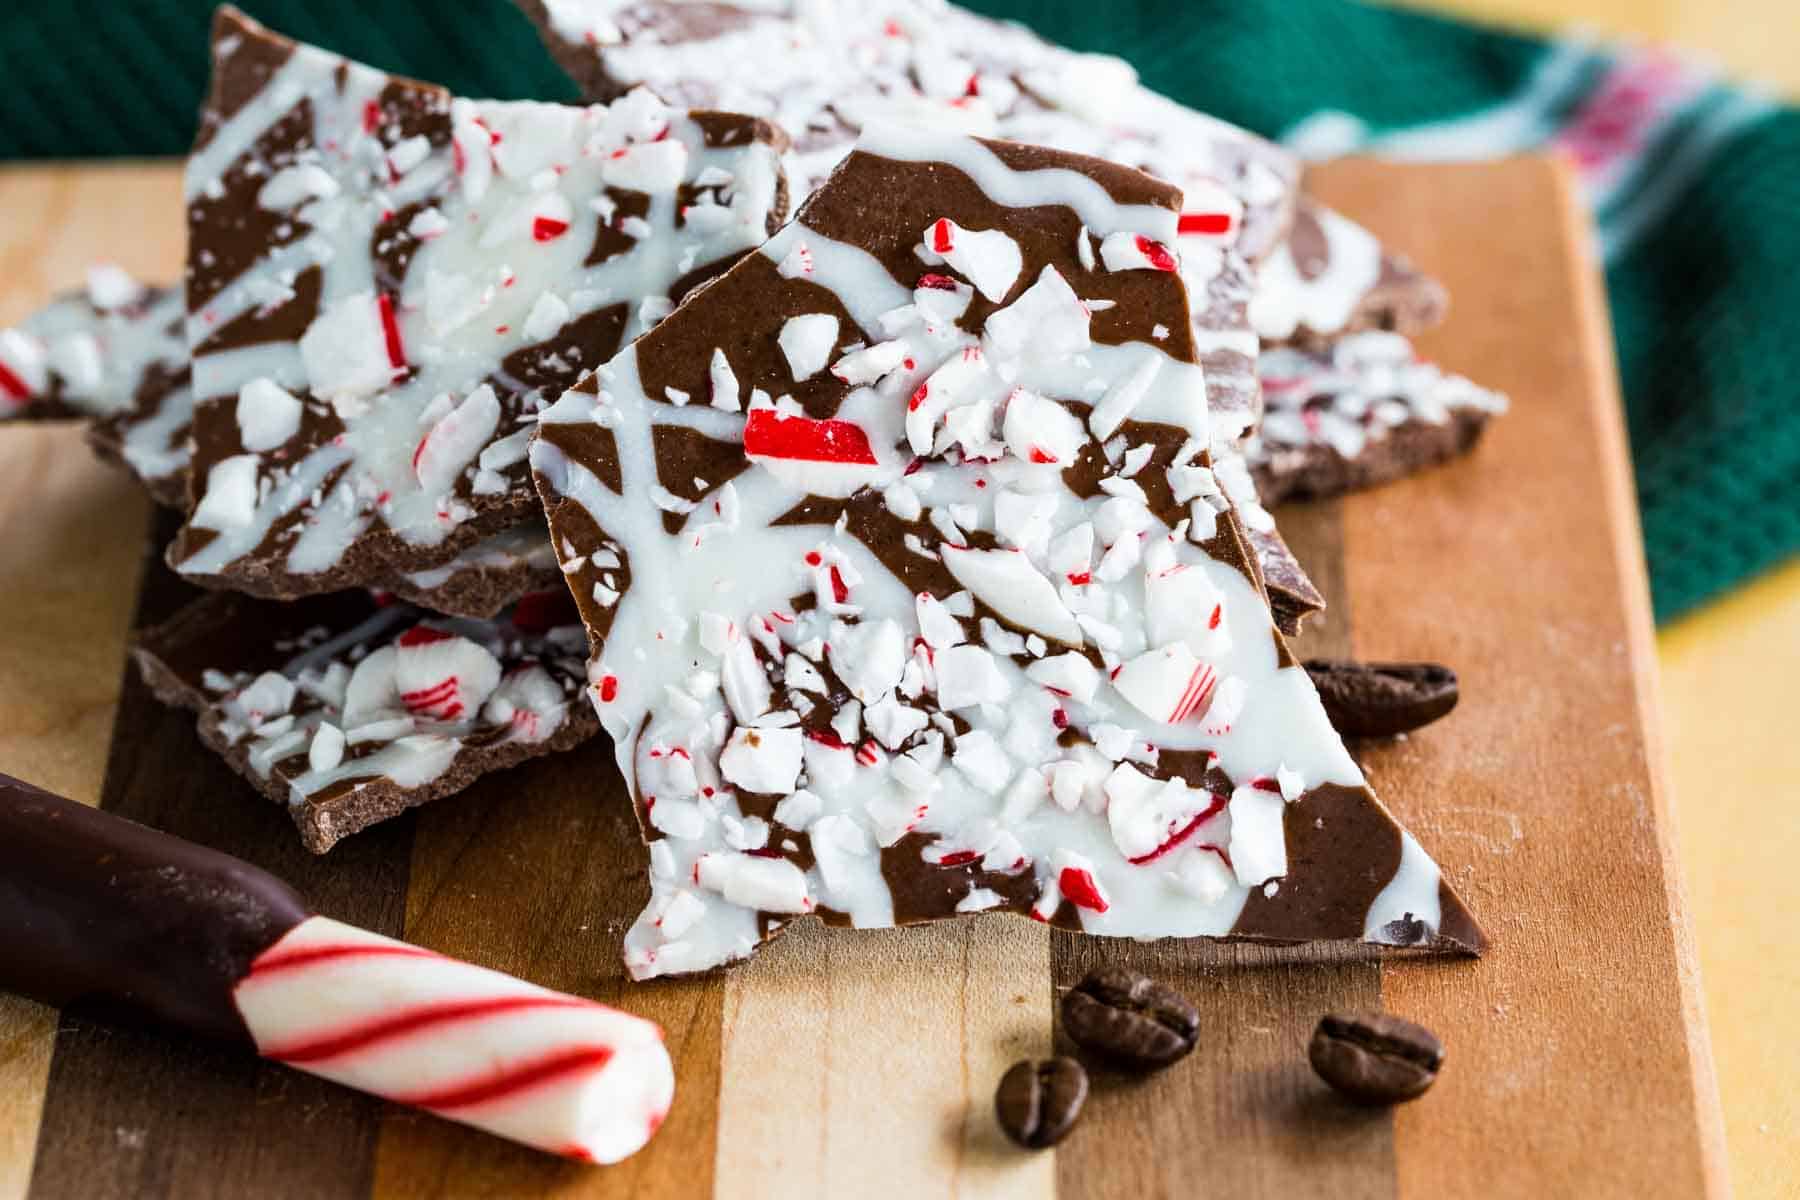 Pieces of Peppermint Mocha Chocolate Bark on a cutting board with a candy cane and coffee beans.